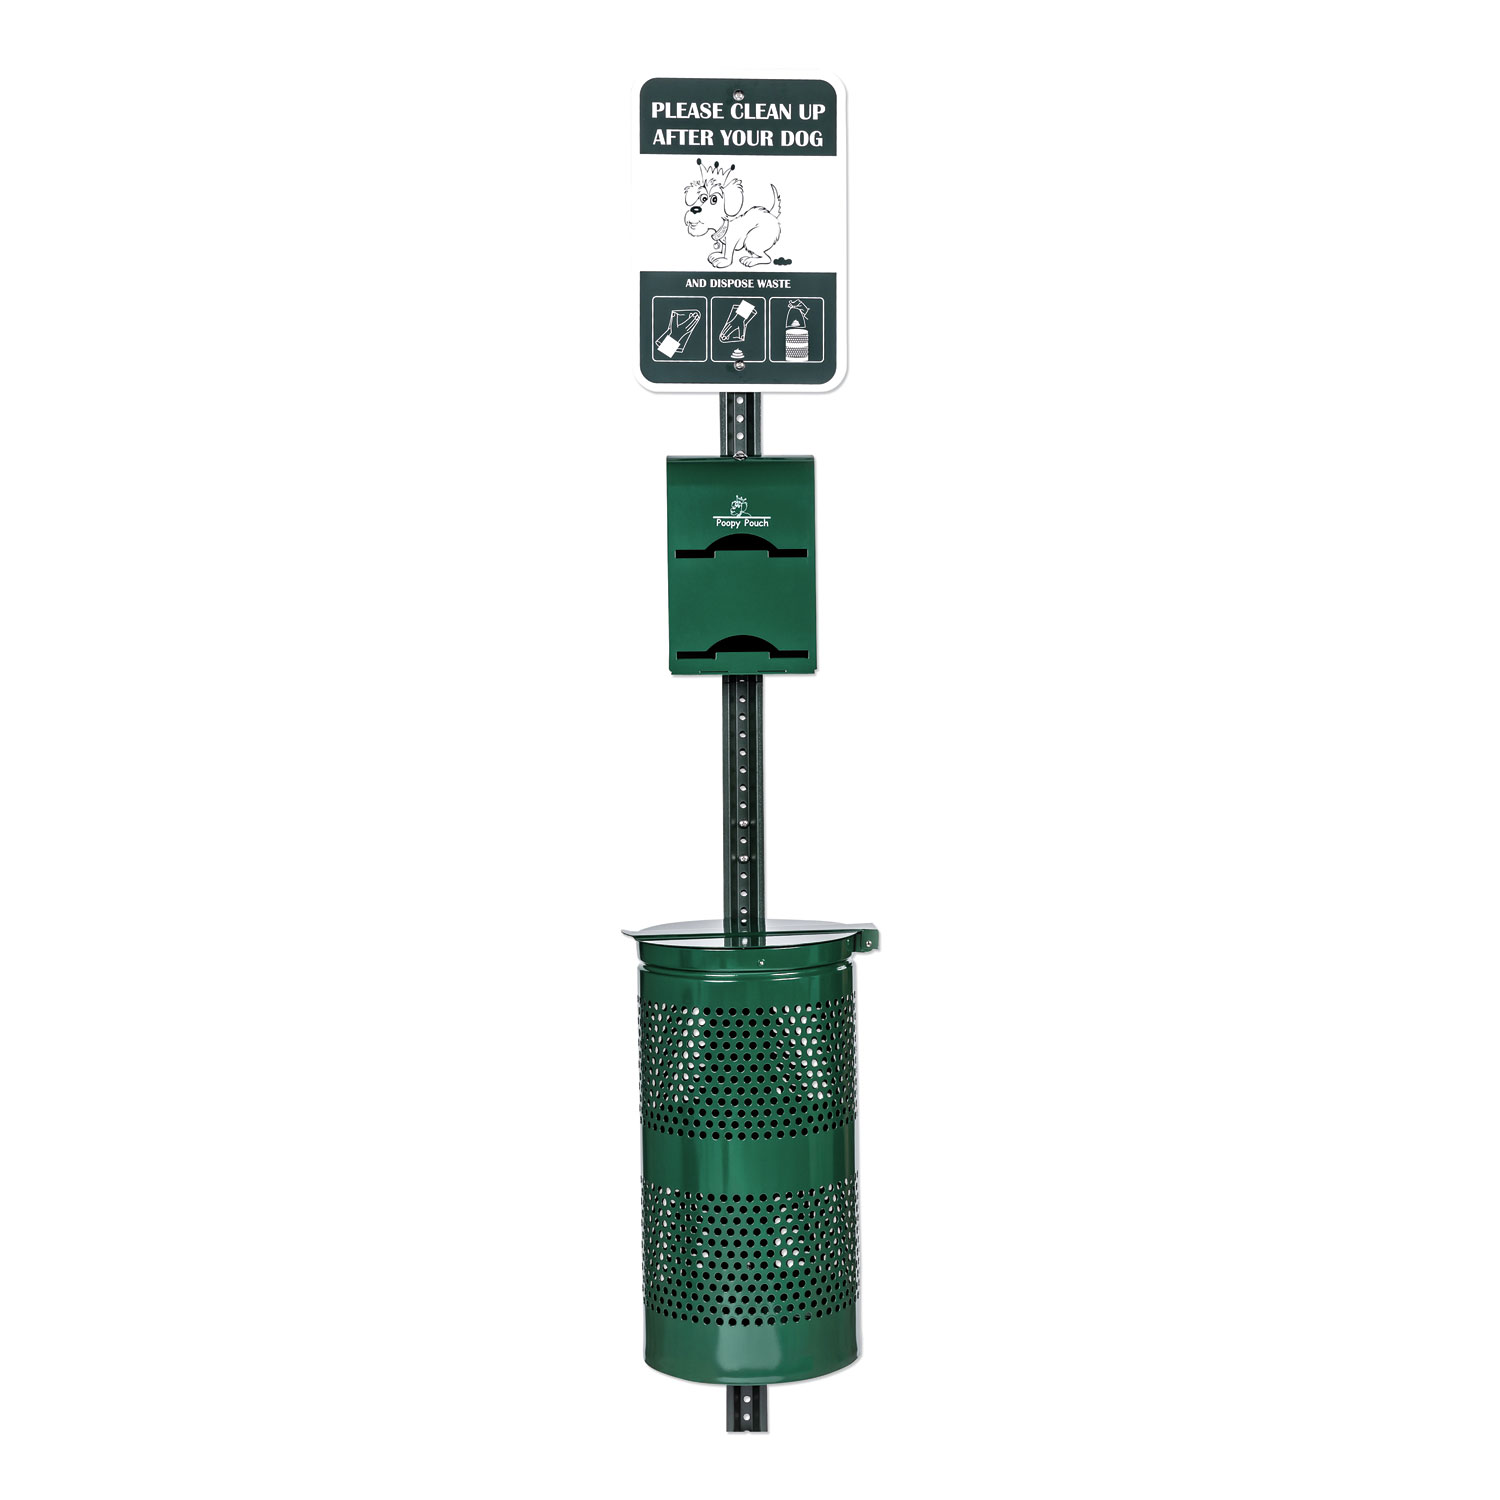  Poopy Pouch PP-SD-01-2R400 Imperial Pet Waste Station, 12 x 14 x 96, Hunter Green (CWDPPSD012R400) 